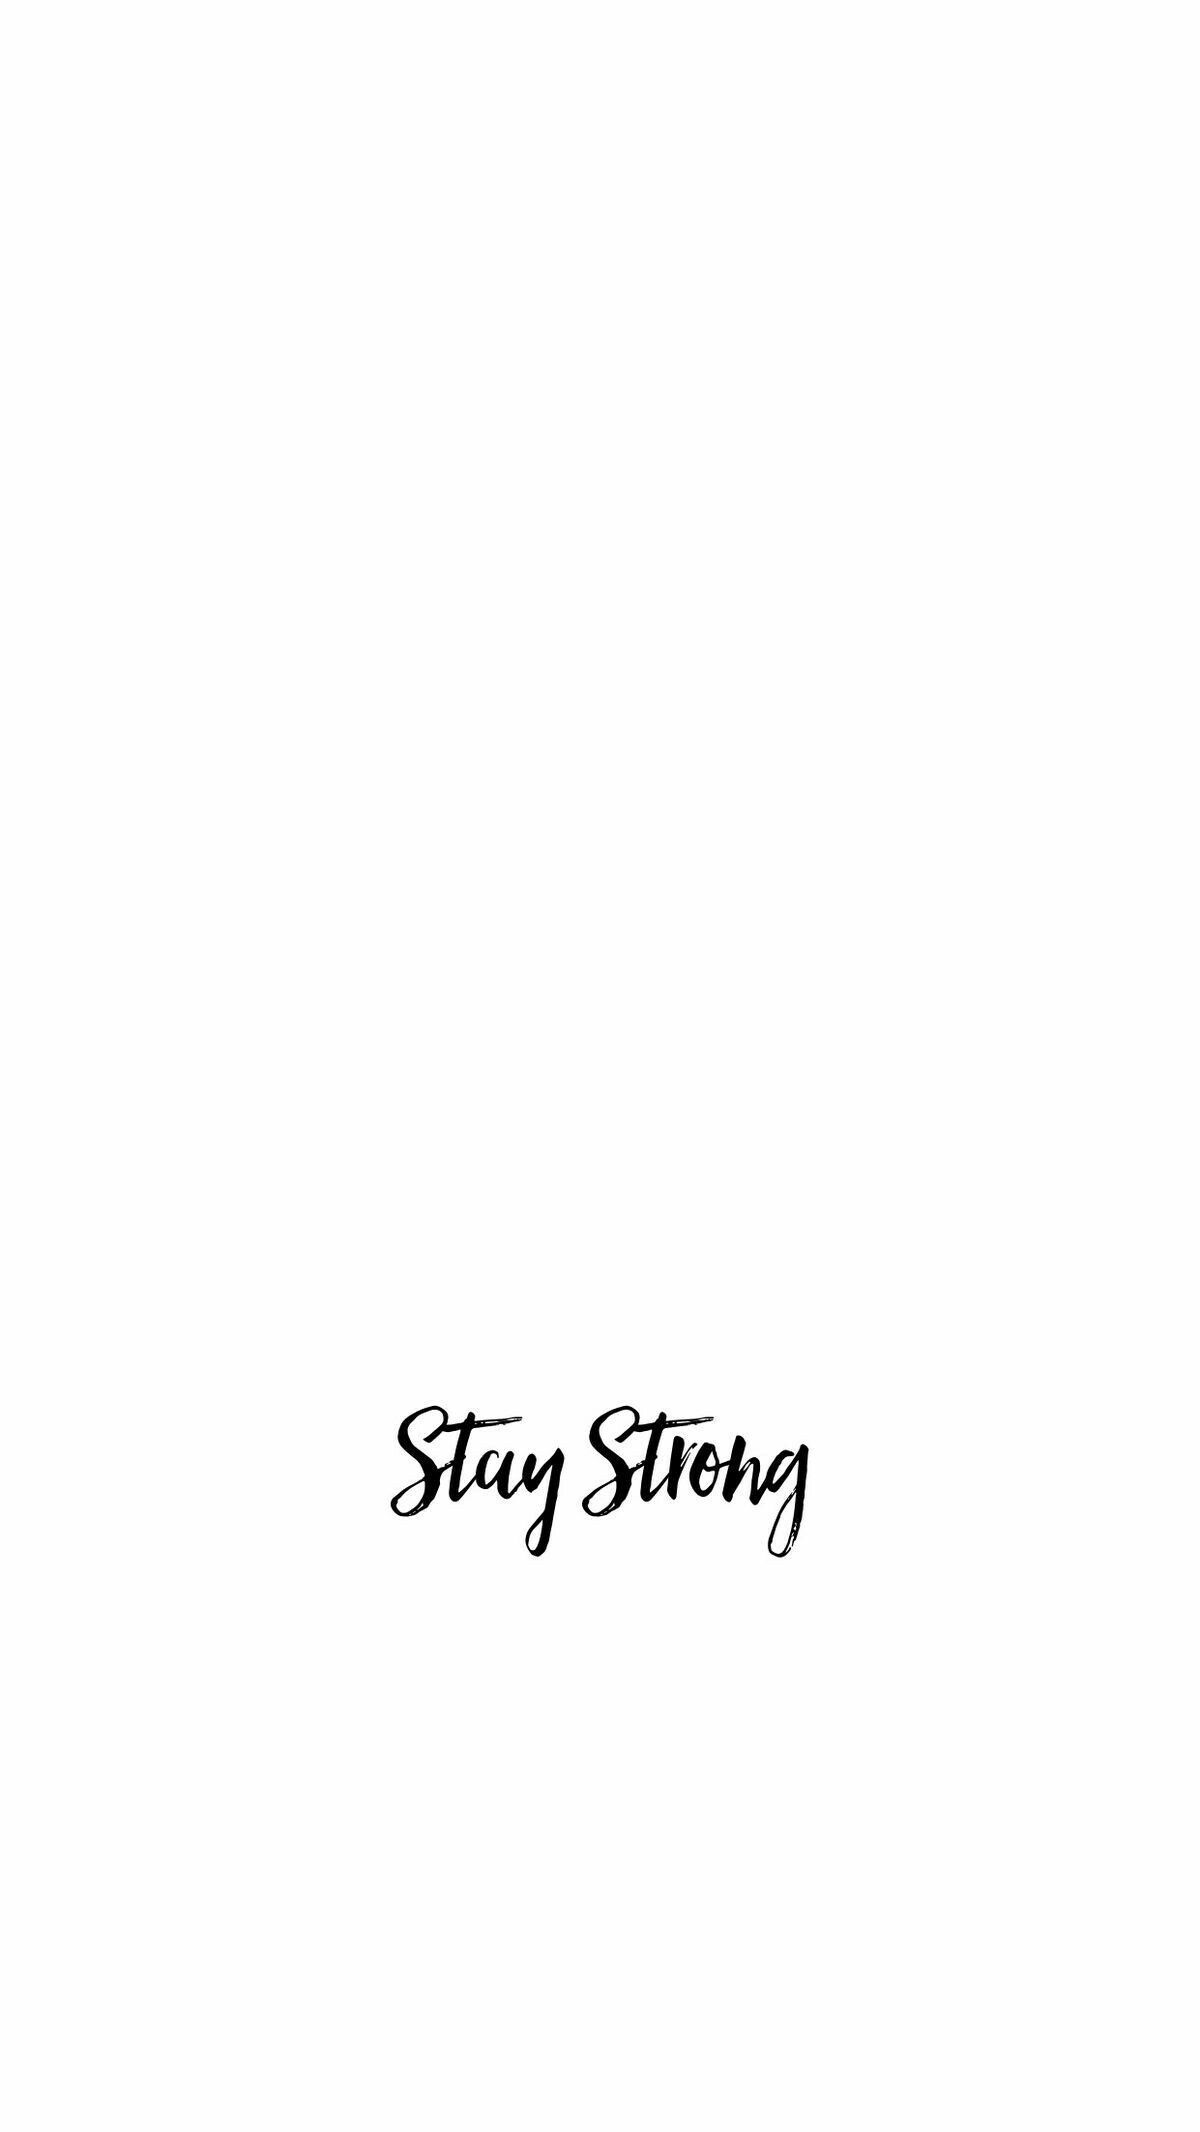 Stay Strong Wallpaper Free Stay Strong Background